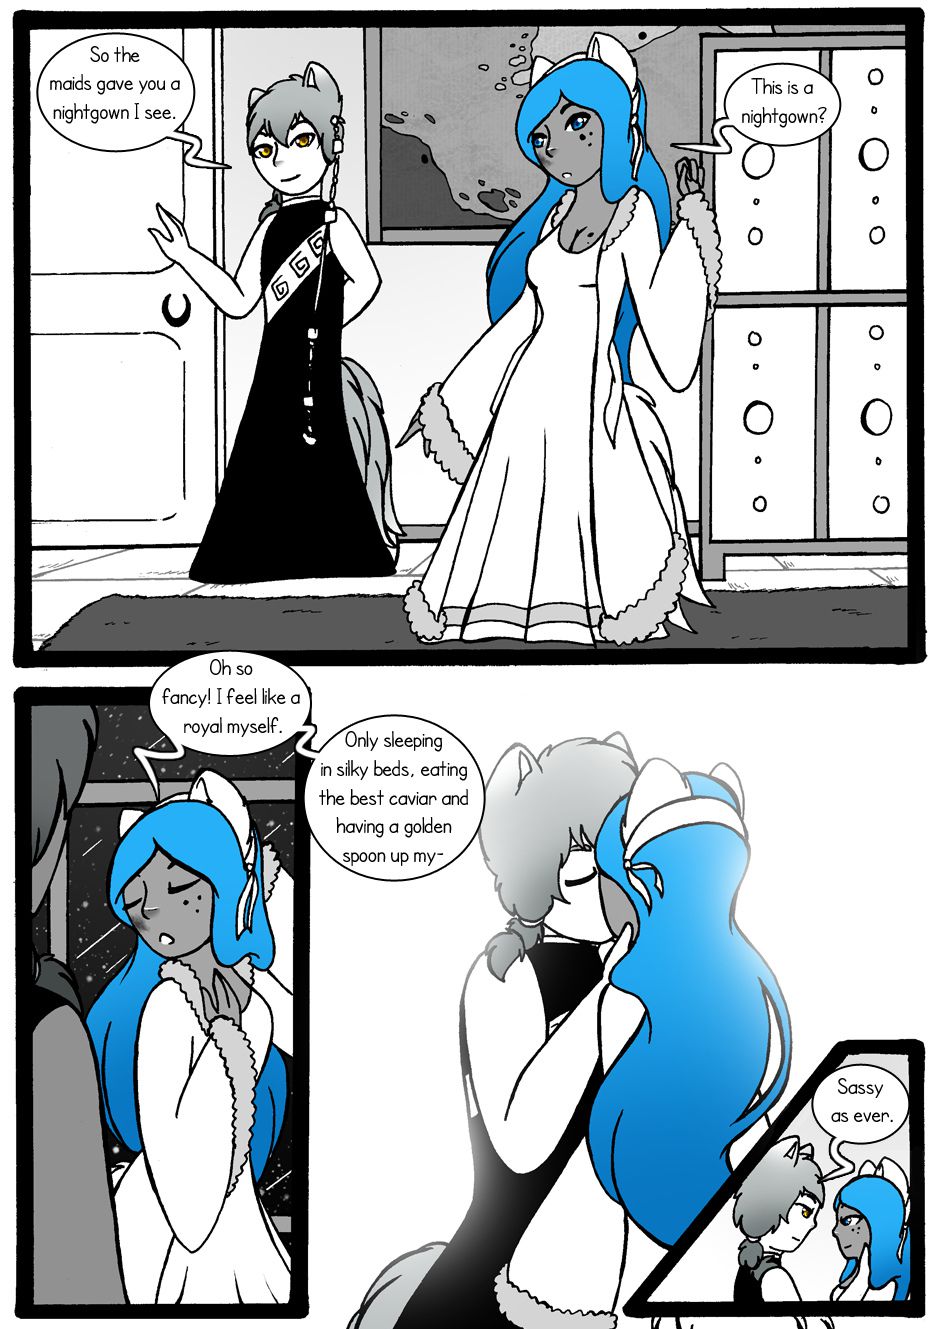 [Jeny-jen94] Between Kings and Queens [Ongoing] 100